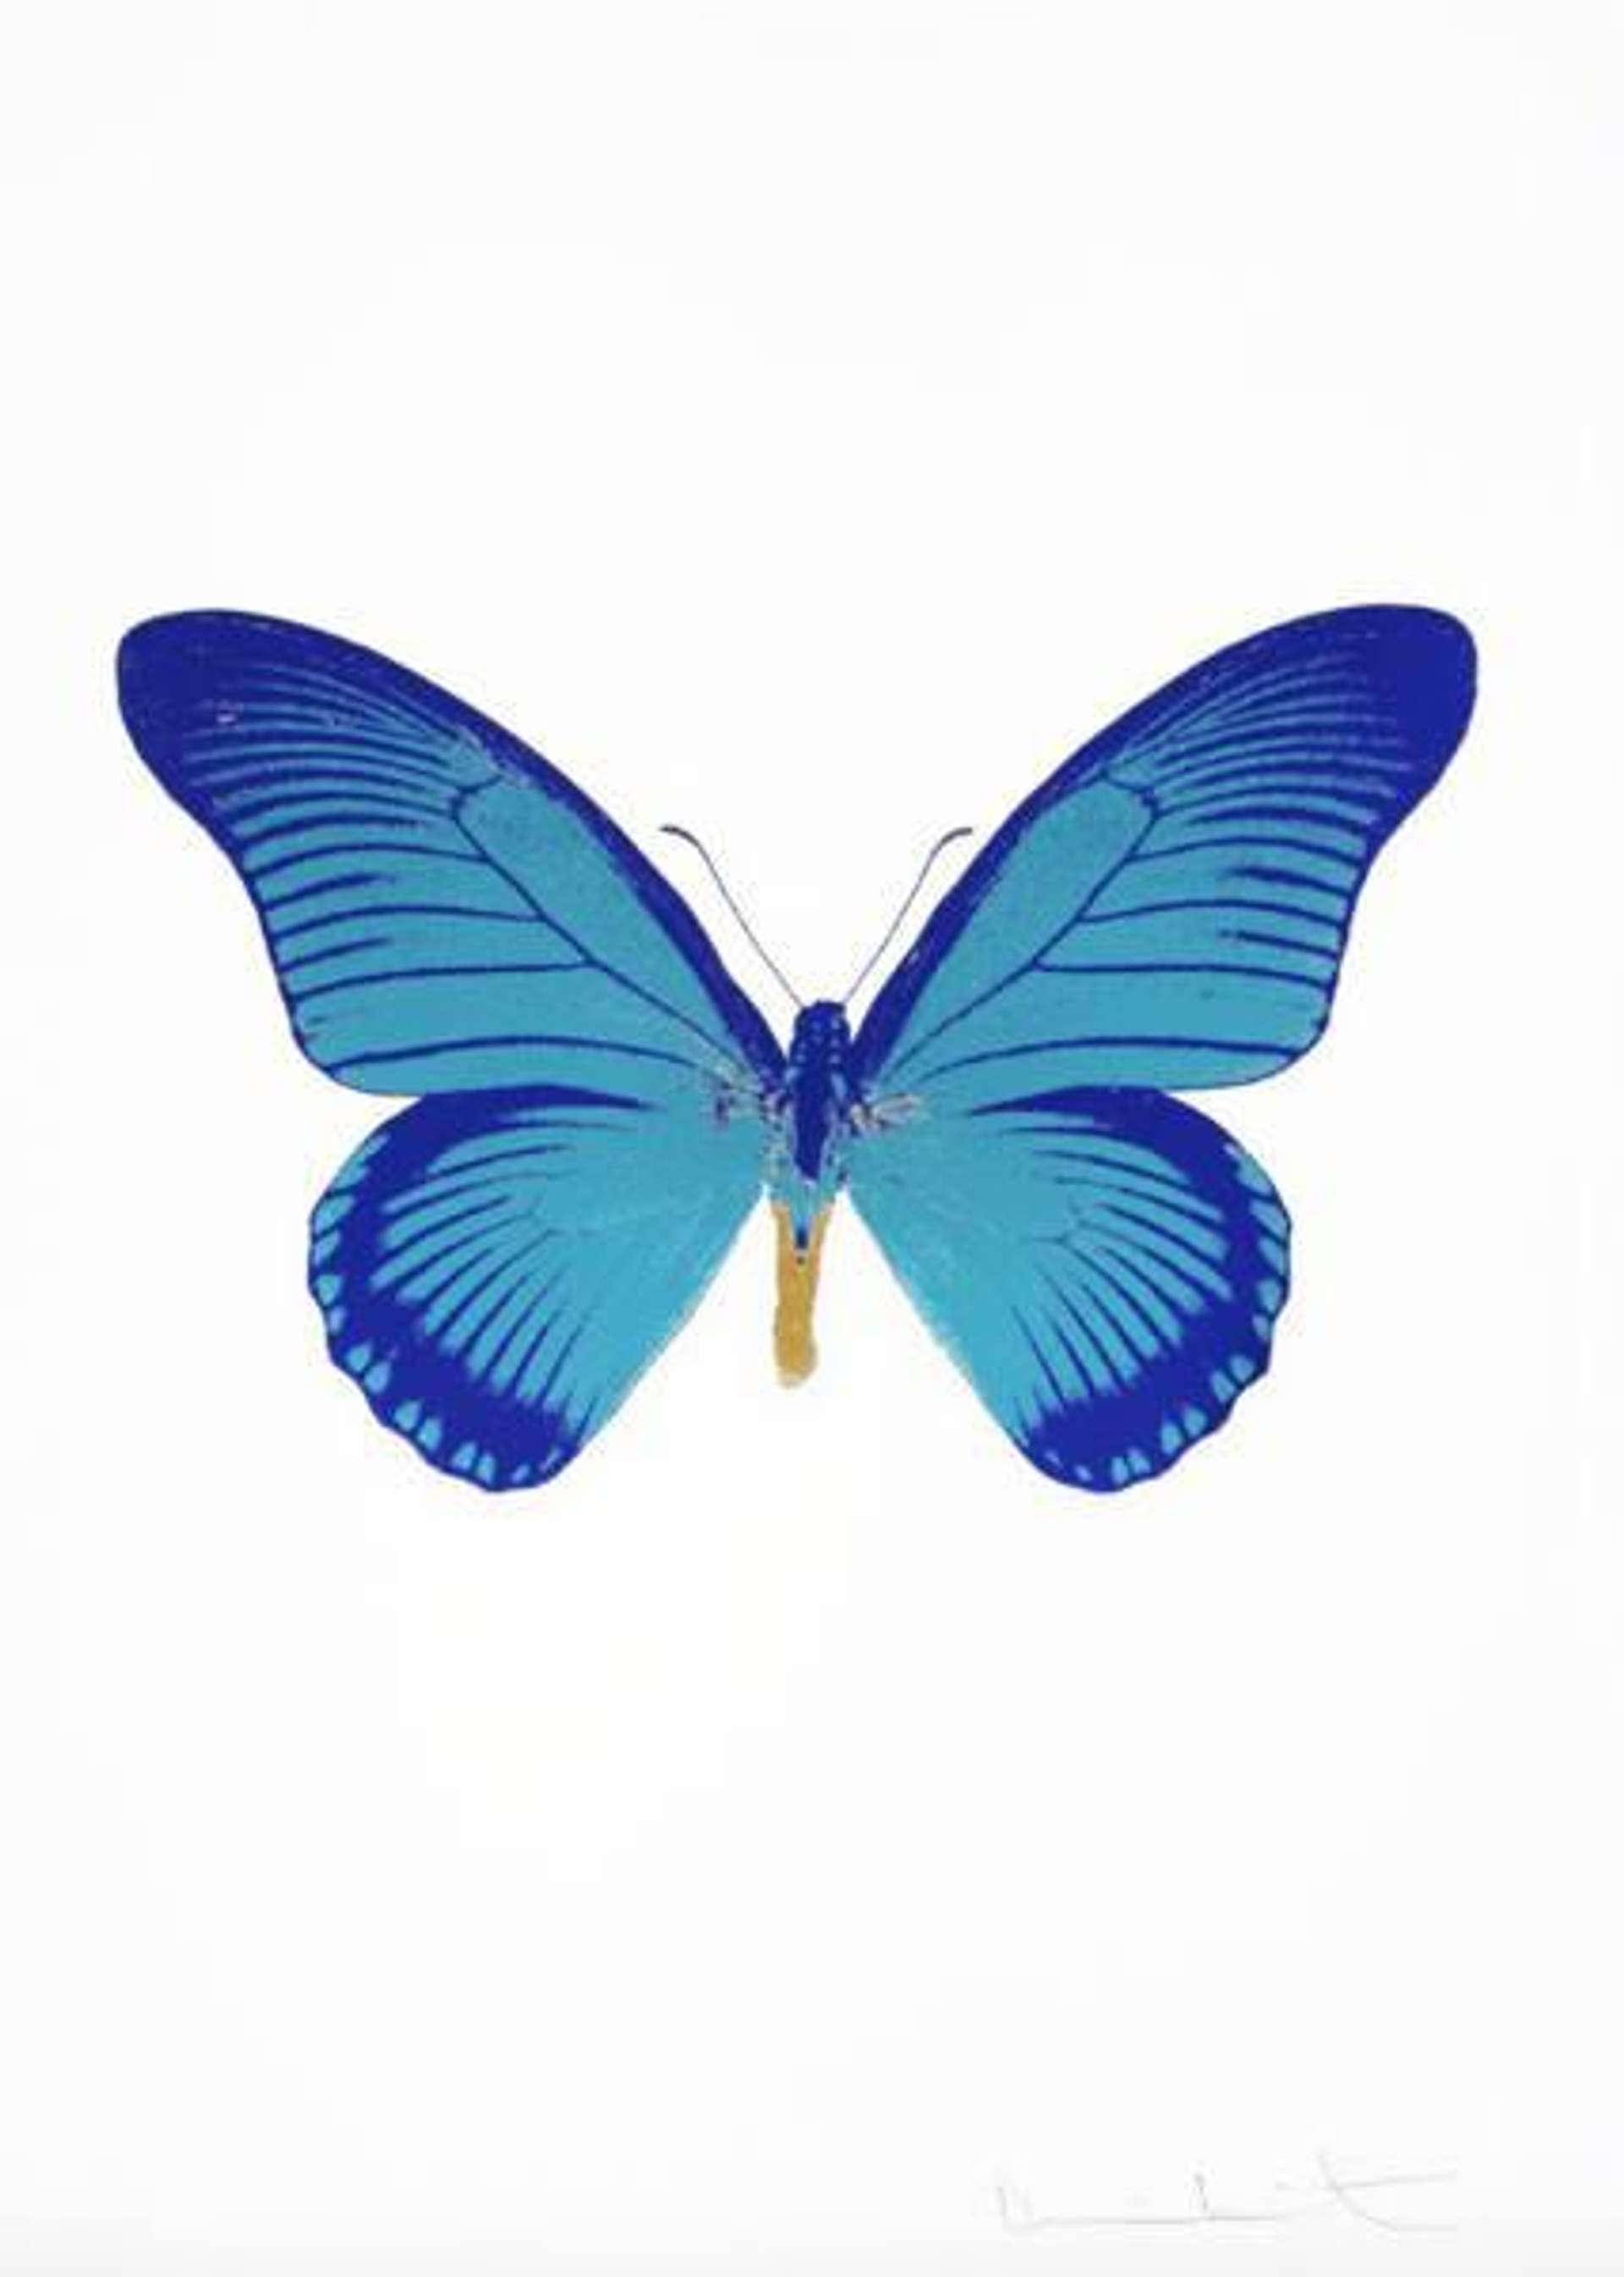 The Souls IV (topaz/westminster blue/african gold) by Damien Hirst